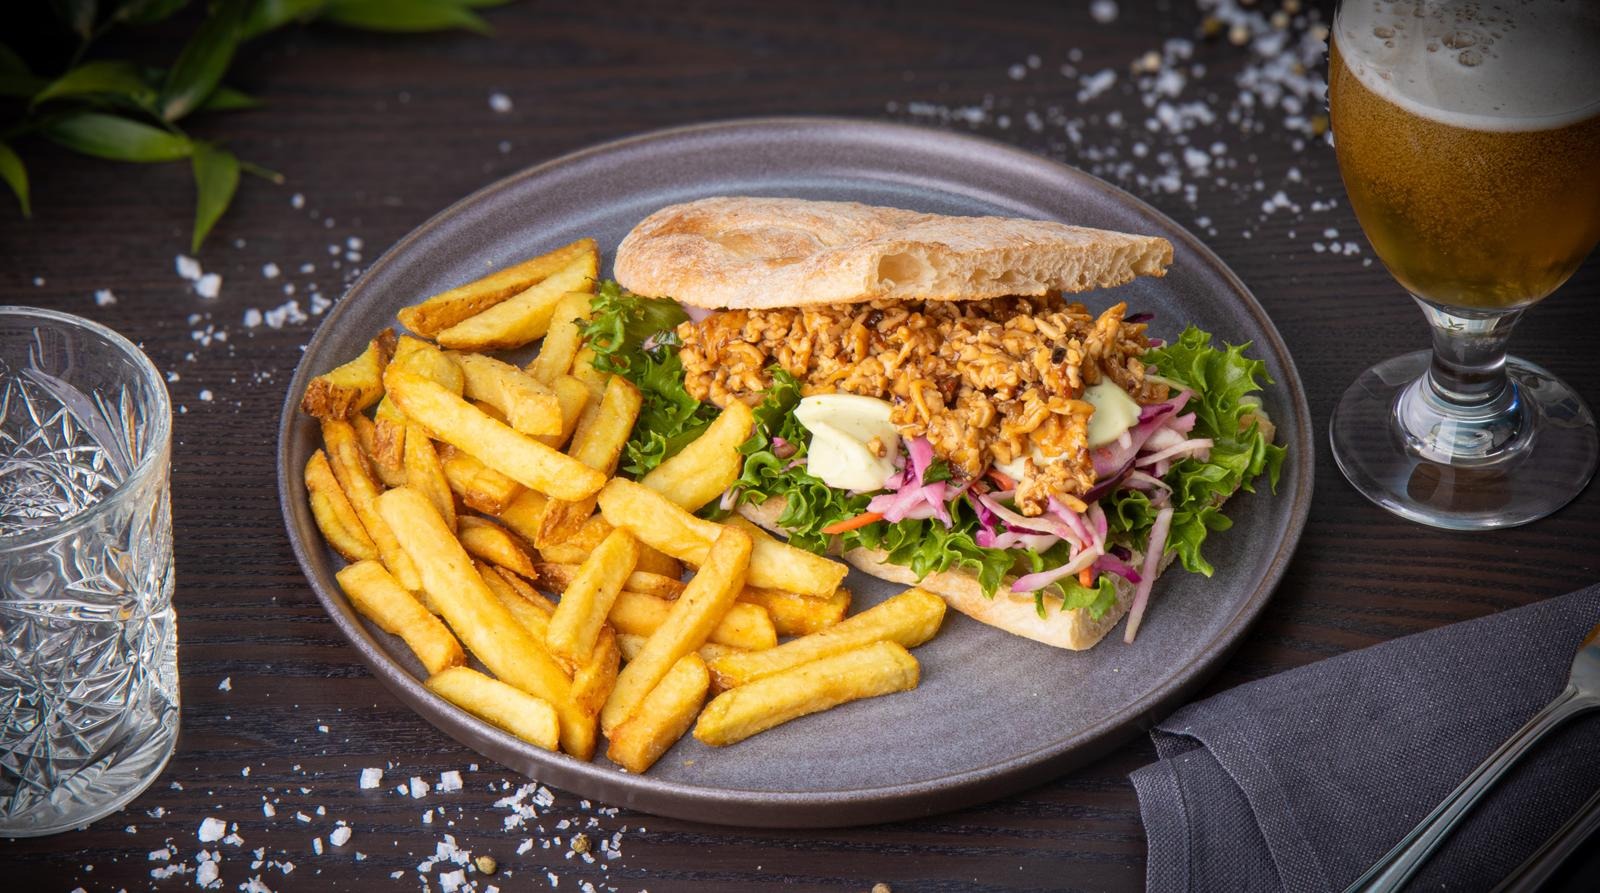 Pulled tofu sandwich, herb mayonnaise, coleslaw and country fries